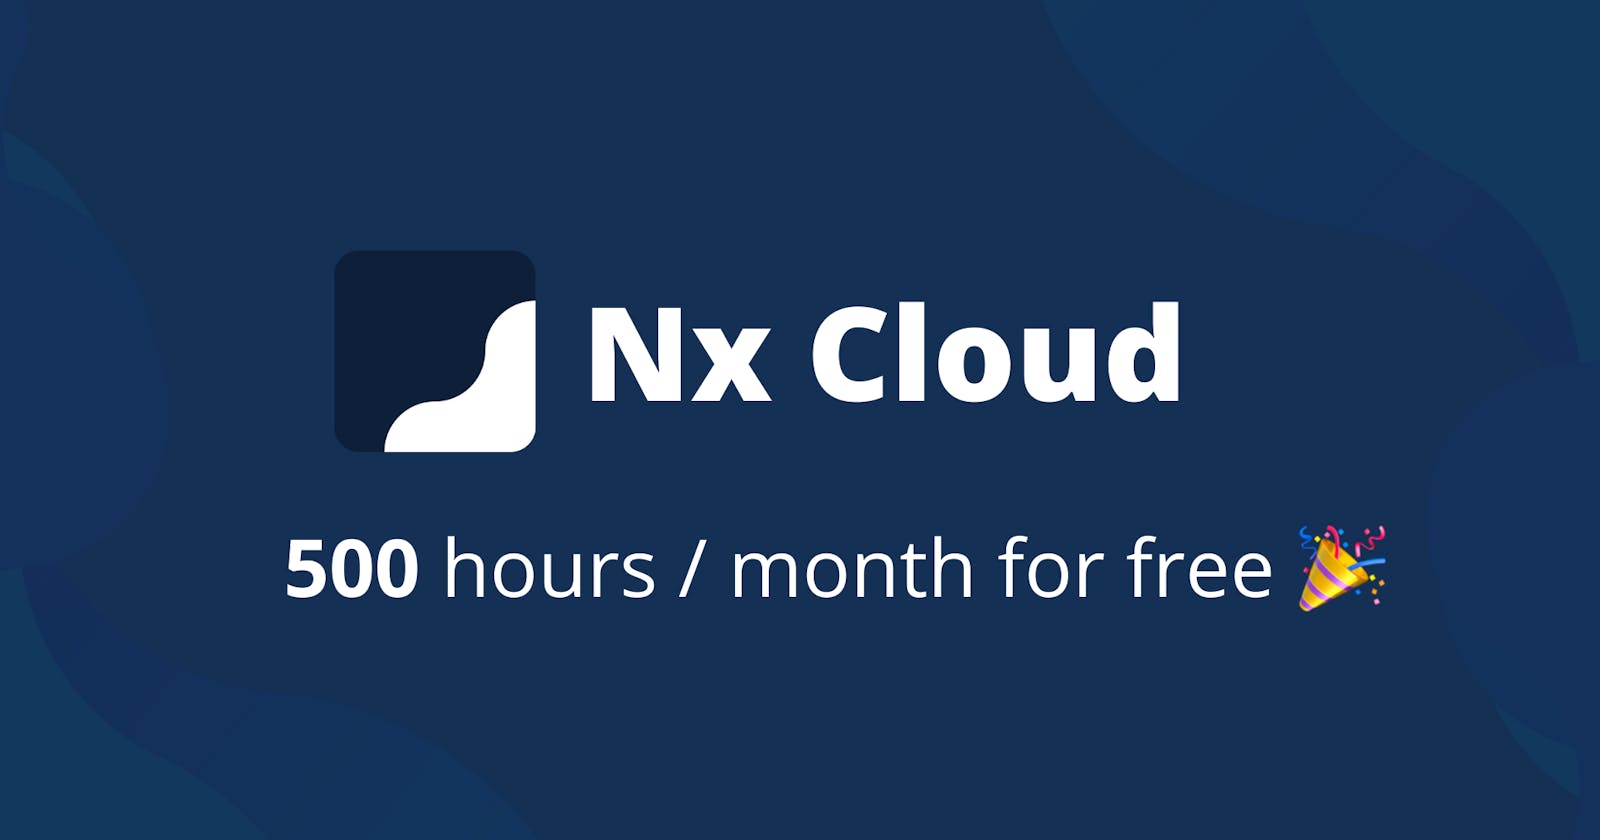 More time saved, for free - with Nx Cloud 🎉